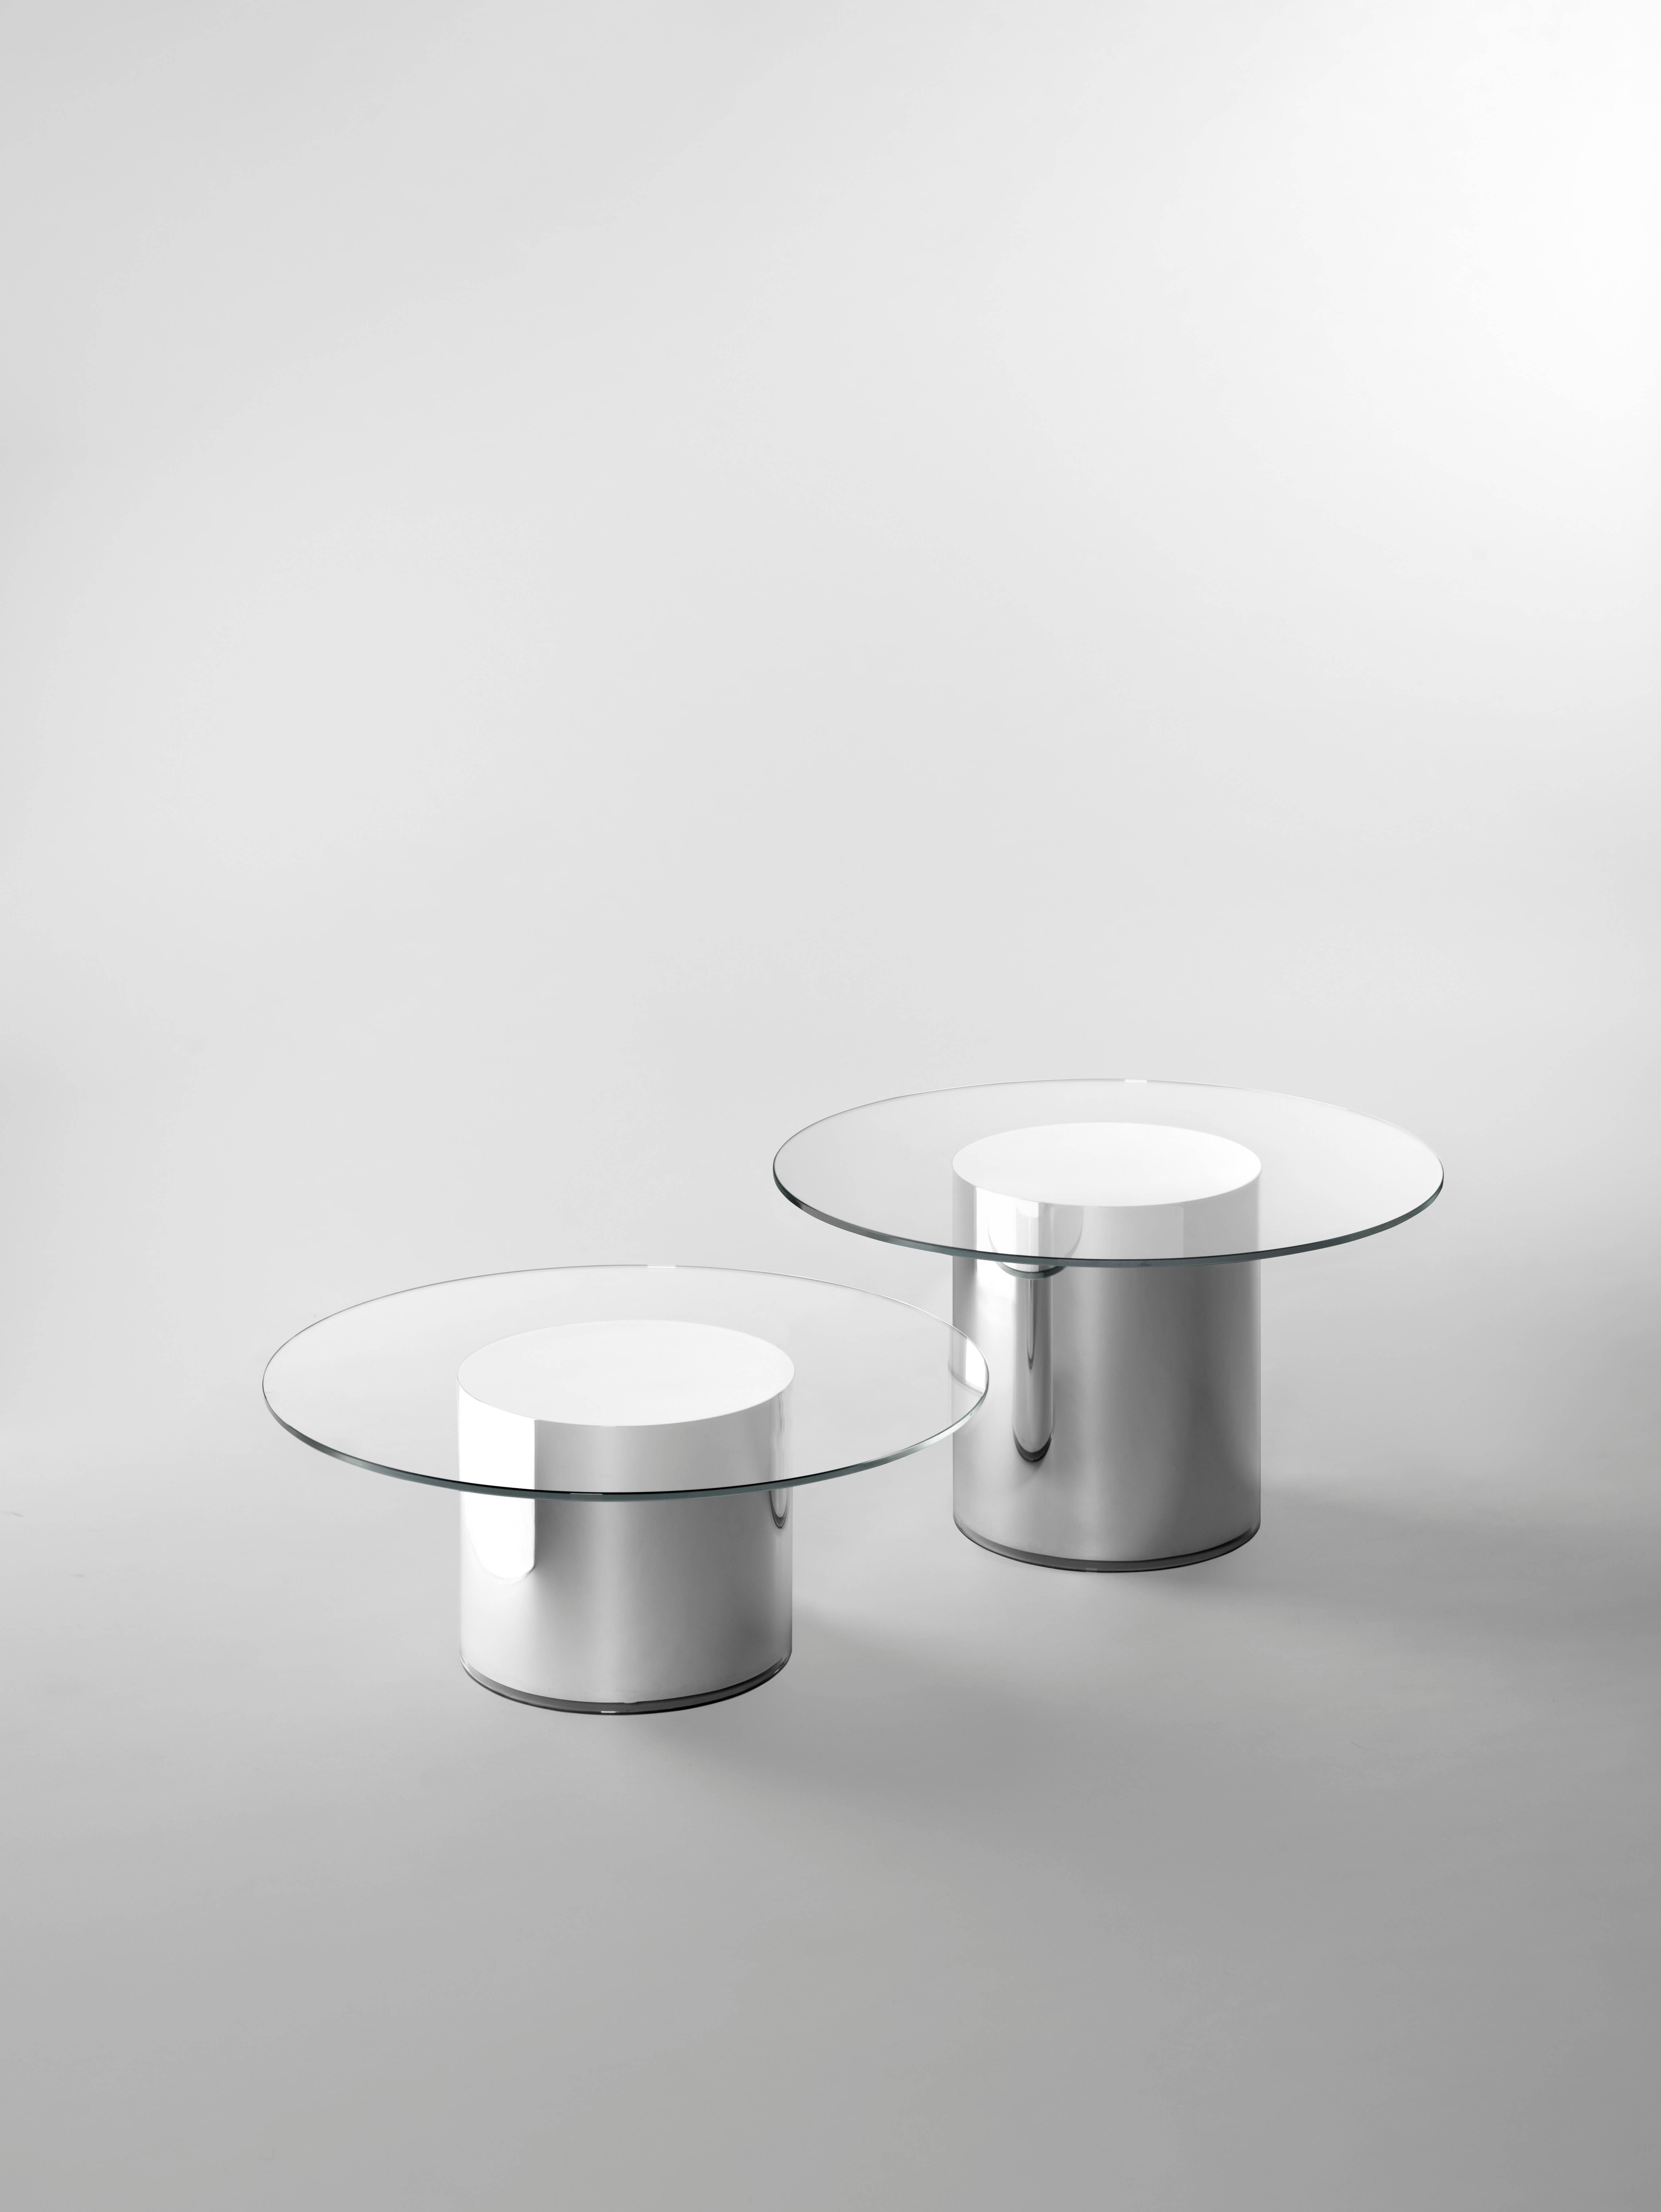 Glass Contemporary Design '2001' N2 Side Tables by Ramon Úbeda and Otto Canalda For Sale